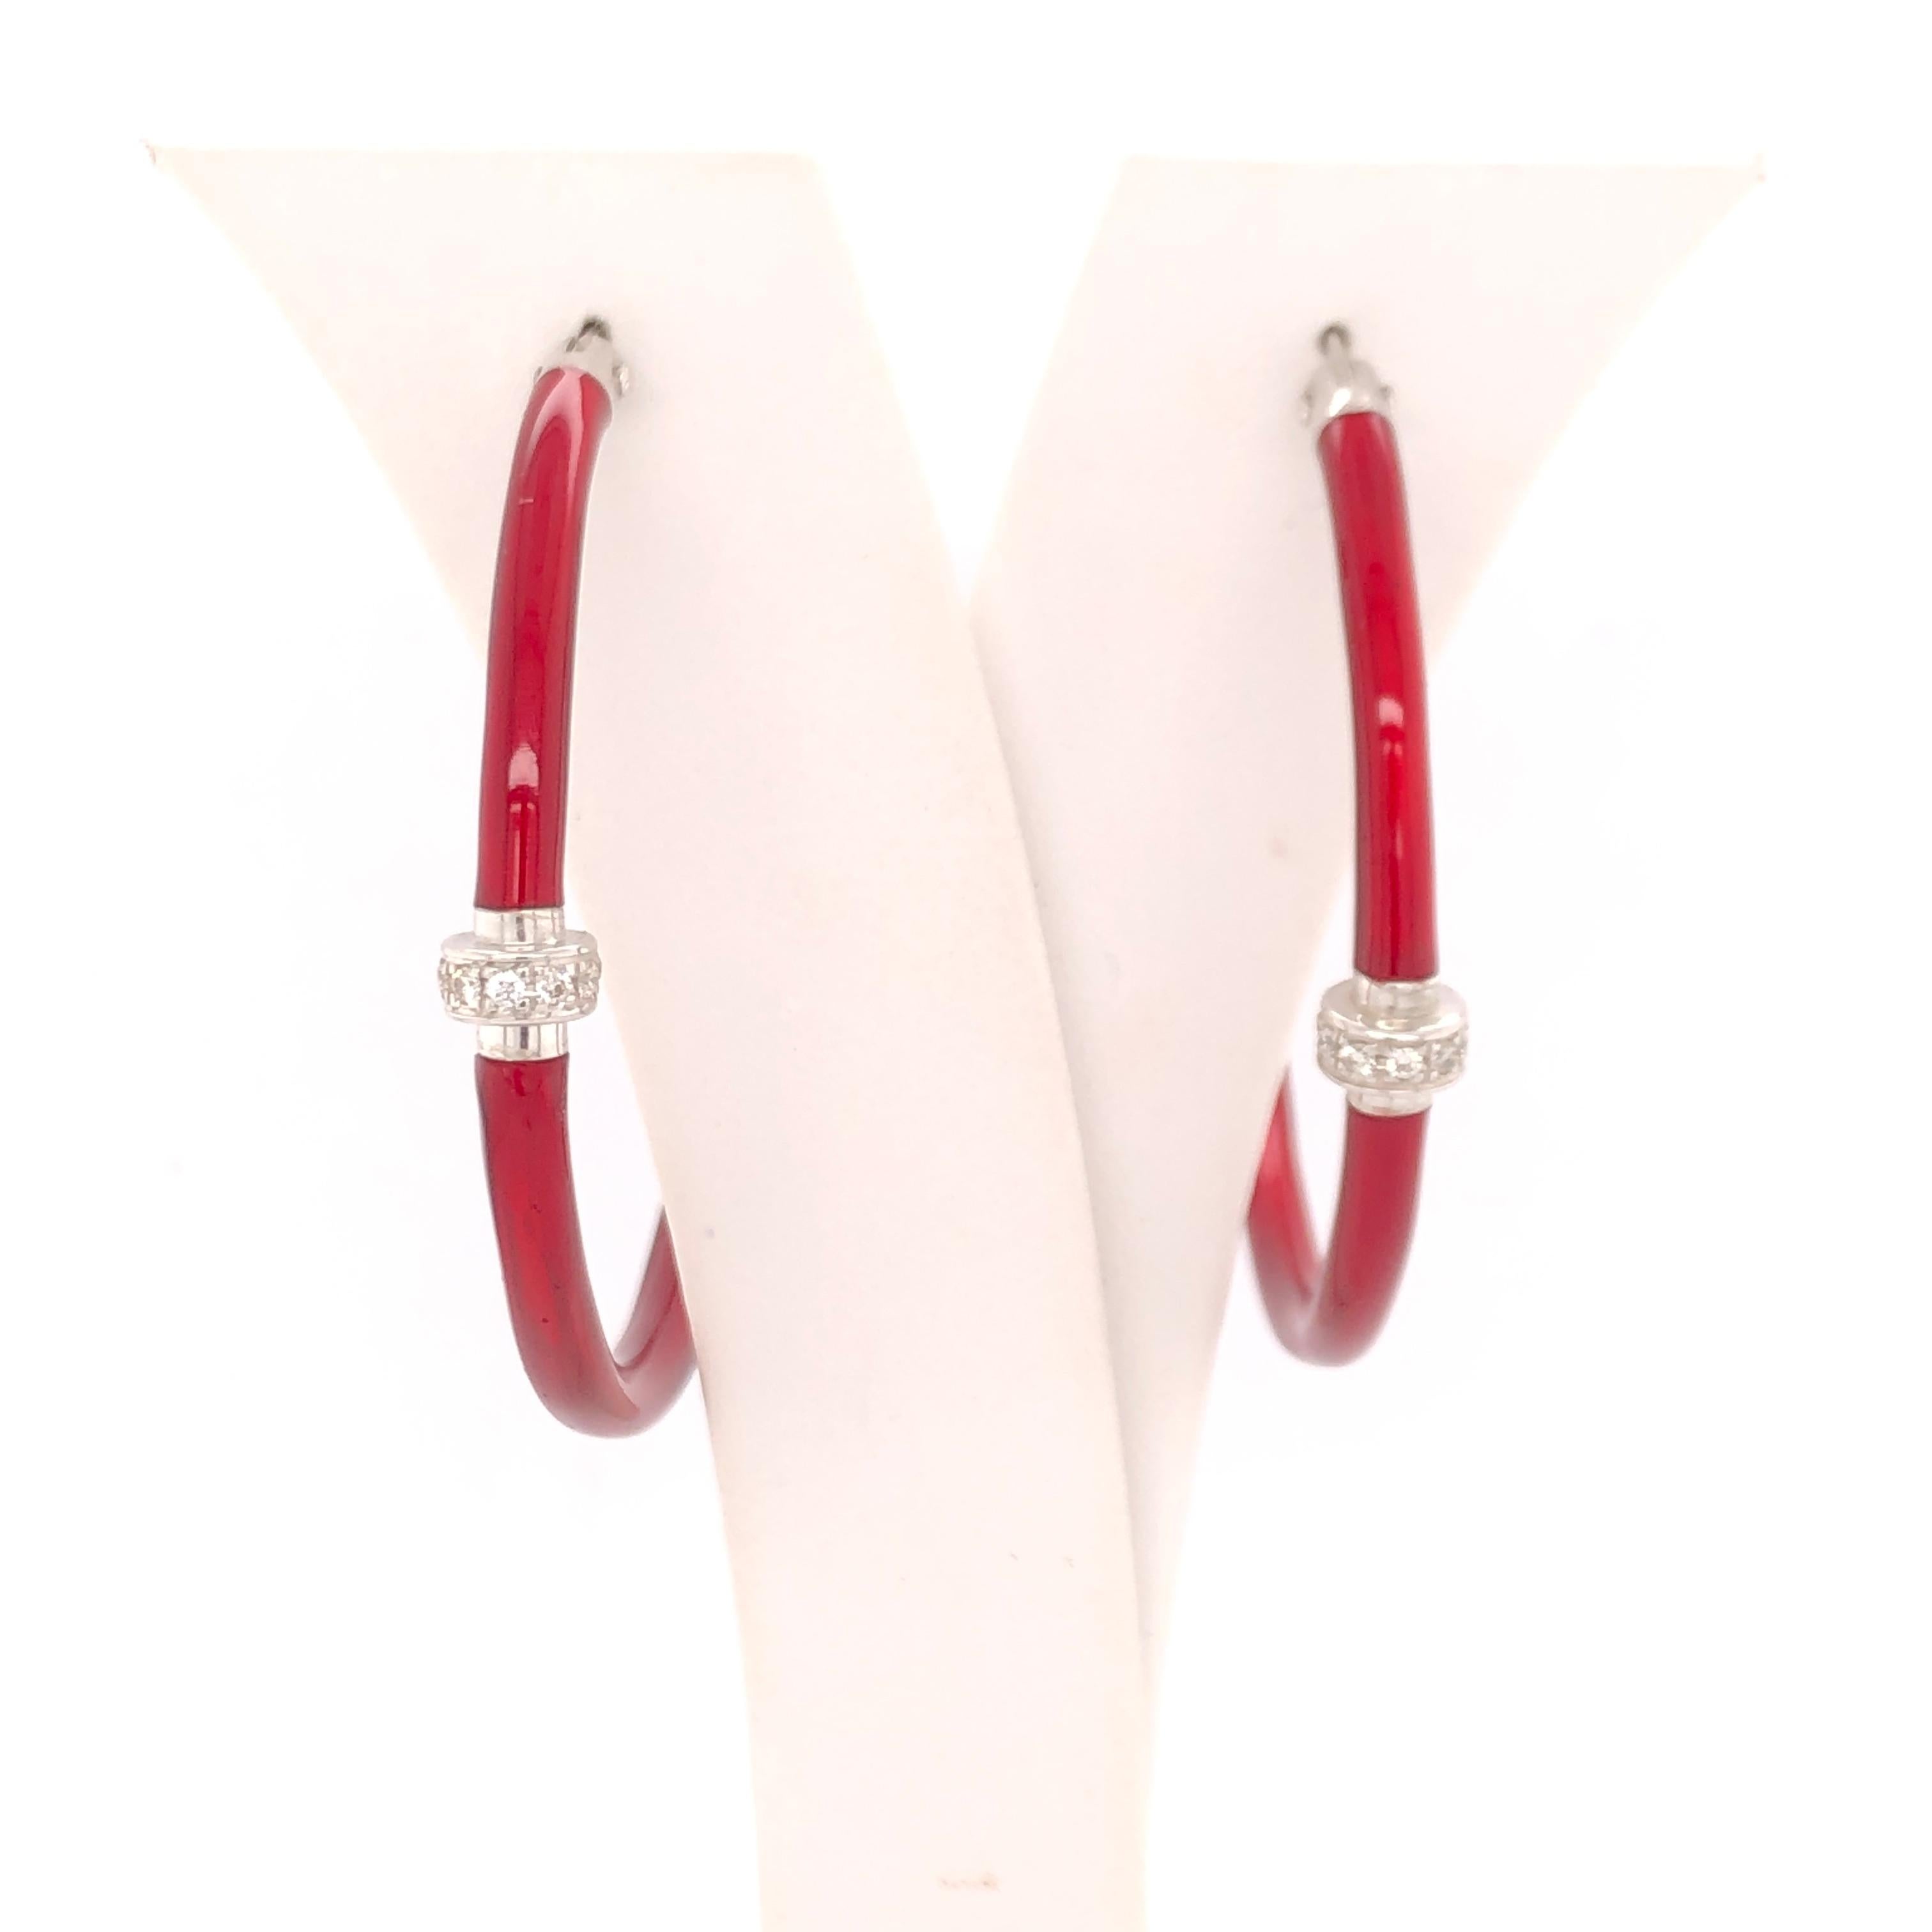 SOHO Red Enamel Hoops with Diamonds

Stamped: Italy 925